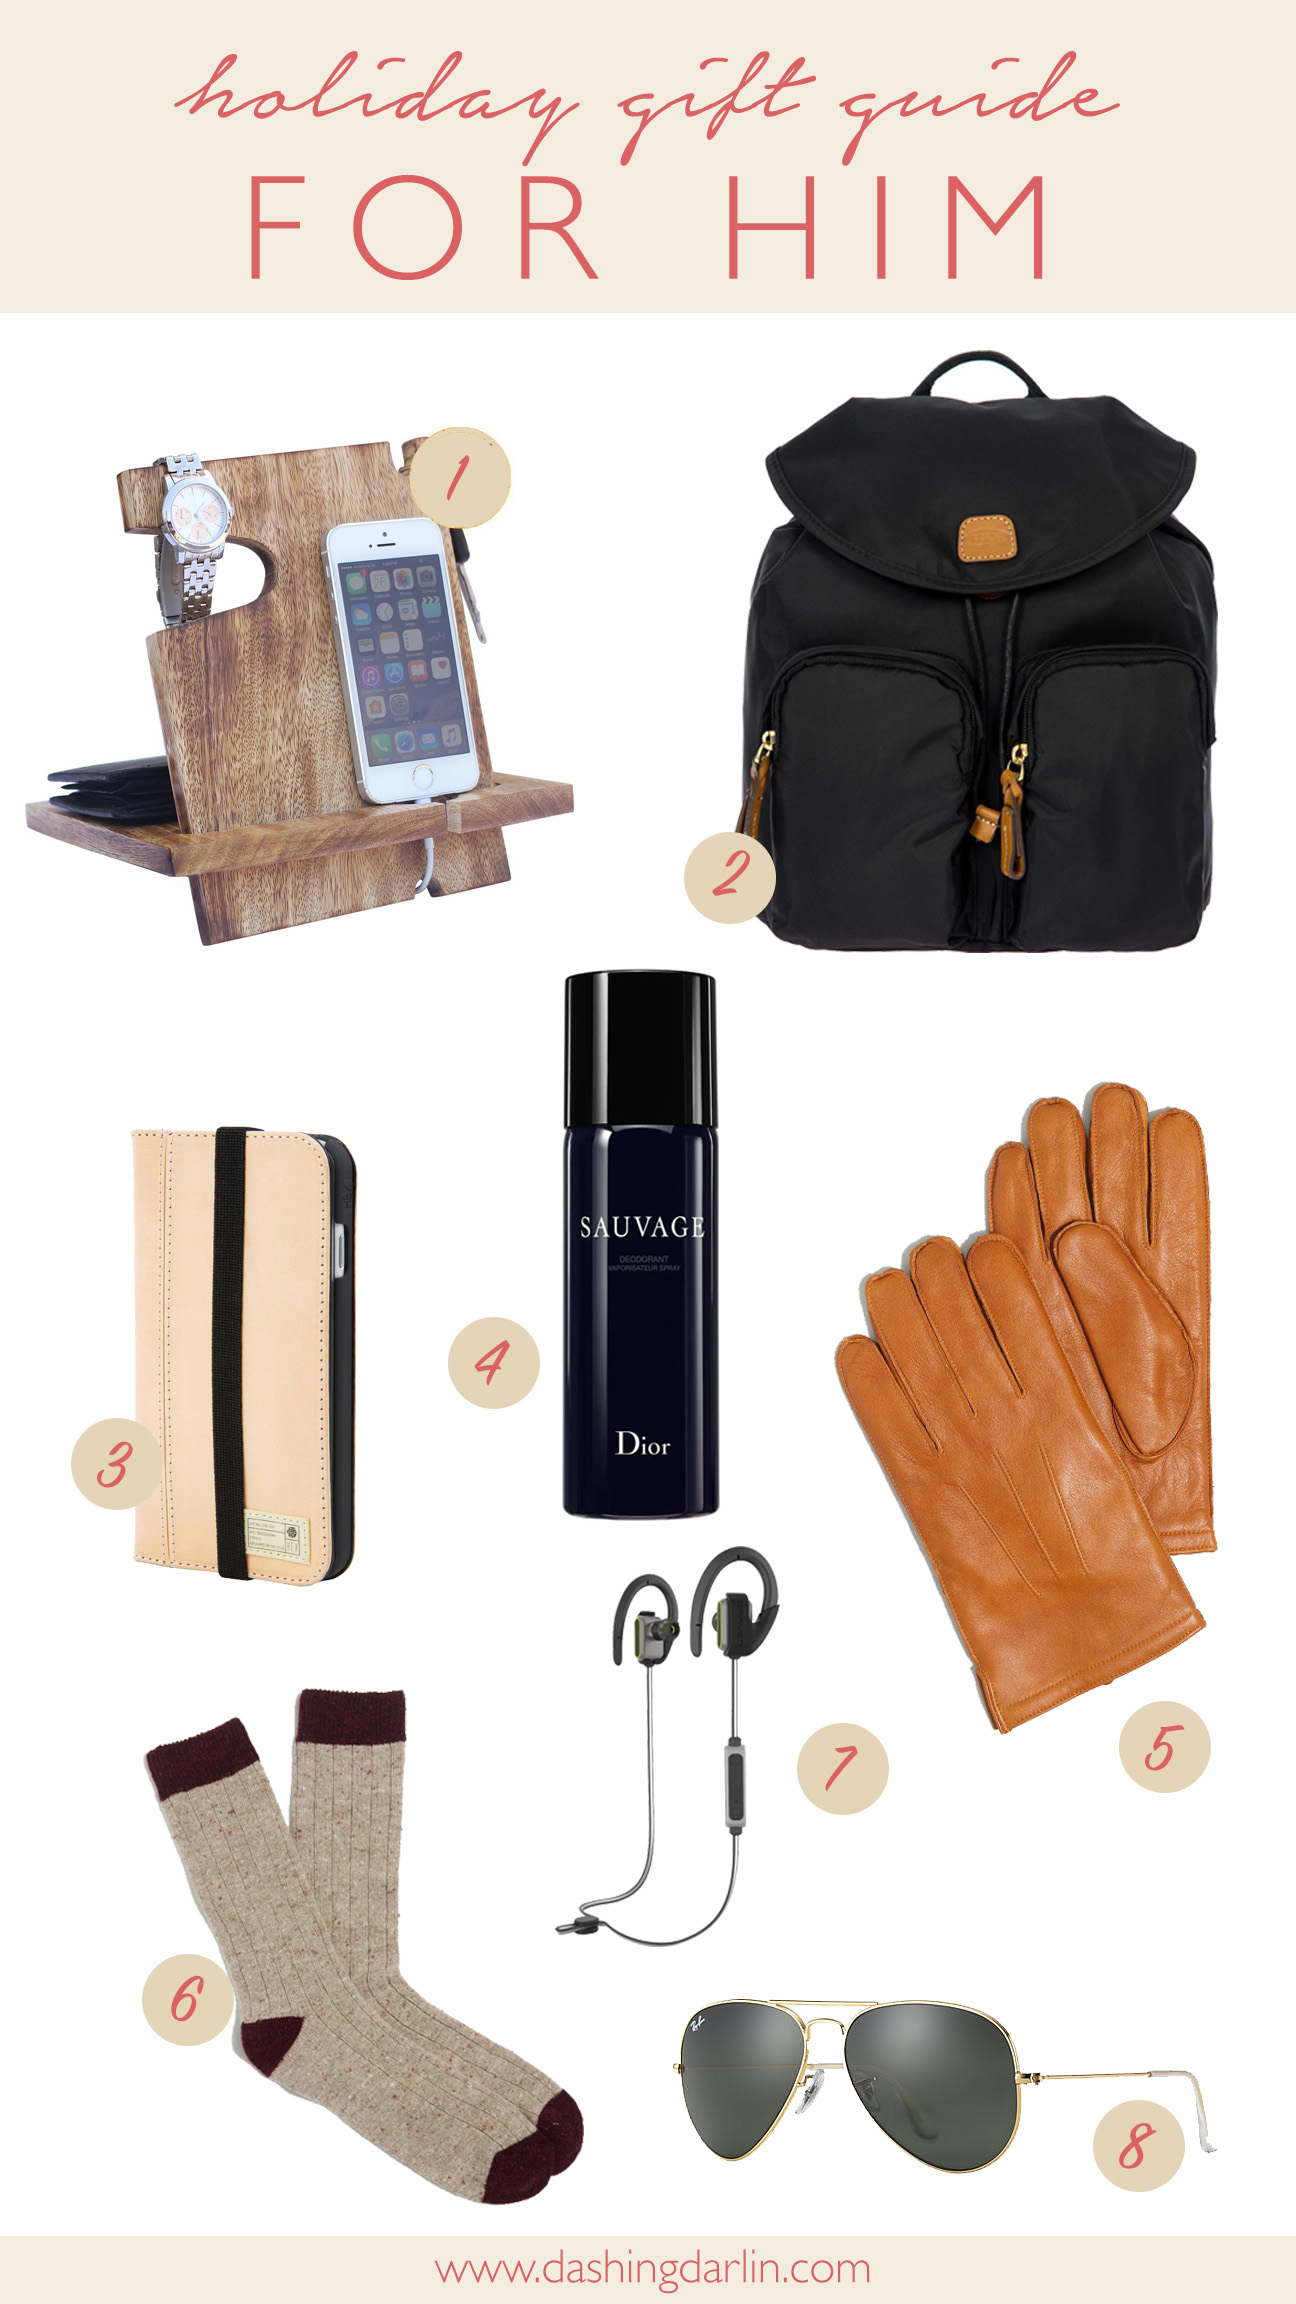 CHRISTMAS GIFT IDEAS FOR THE MEN IN YOUR LIFE. GIFTS FOR UNDER $100.